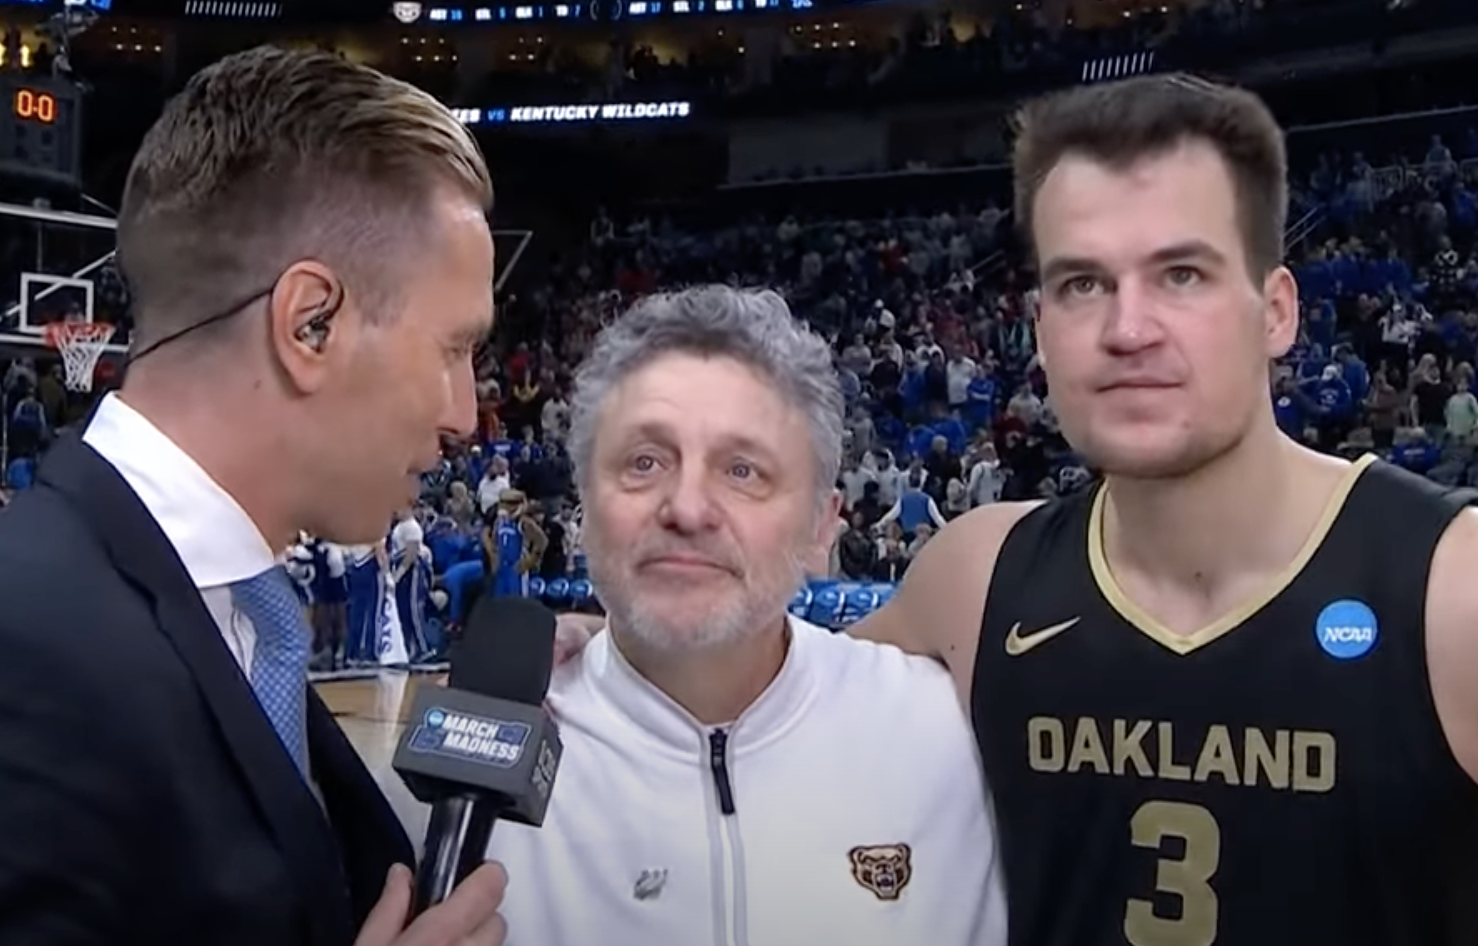 Oakland’s Jack Gohlke and Greg Kampe are going to the Final Four!